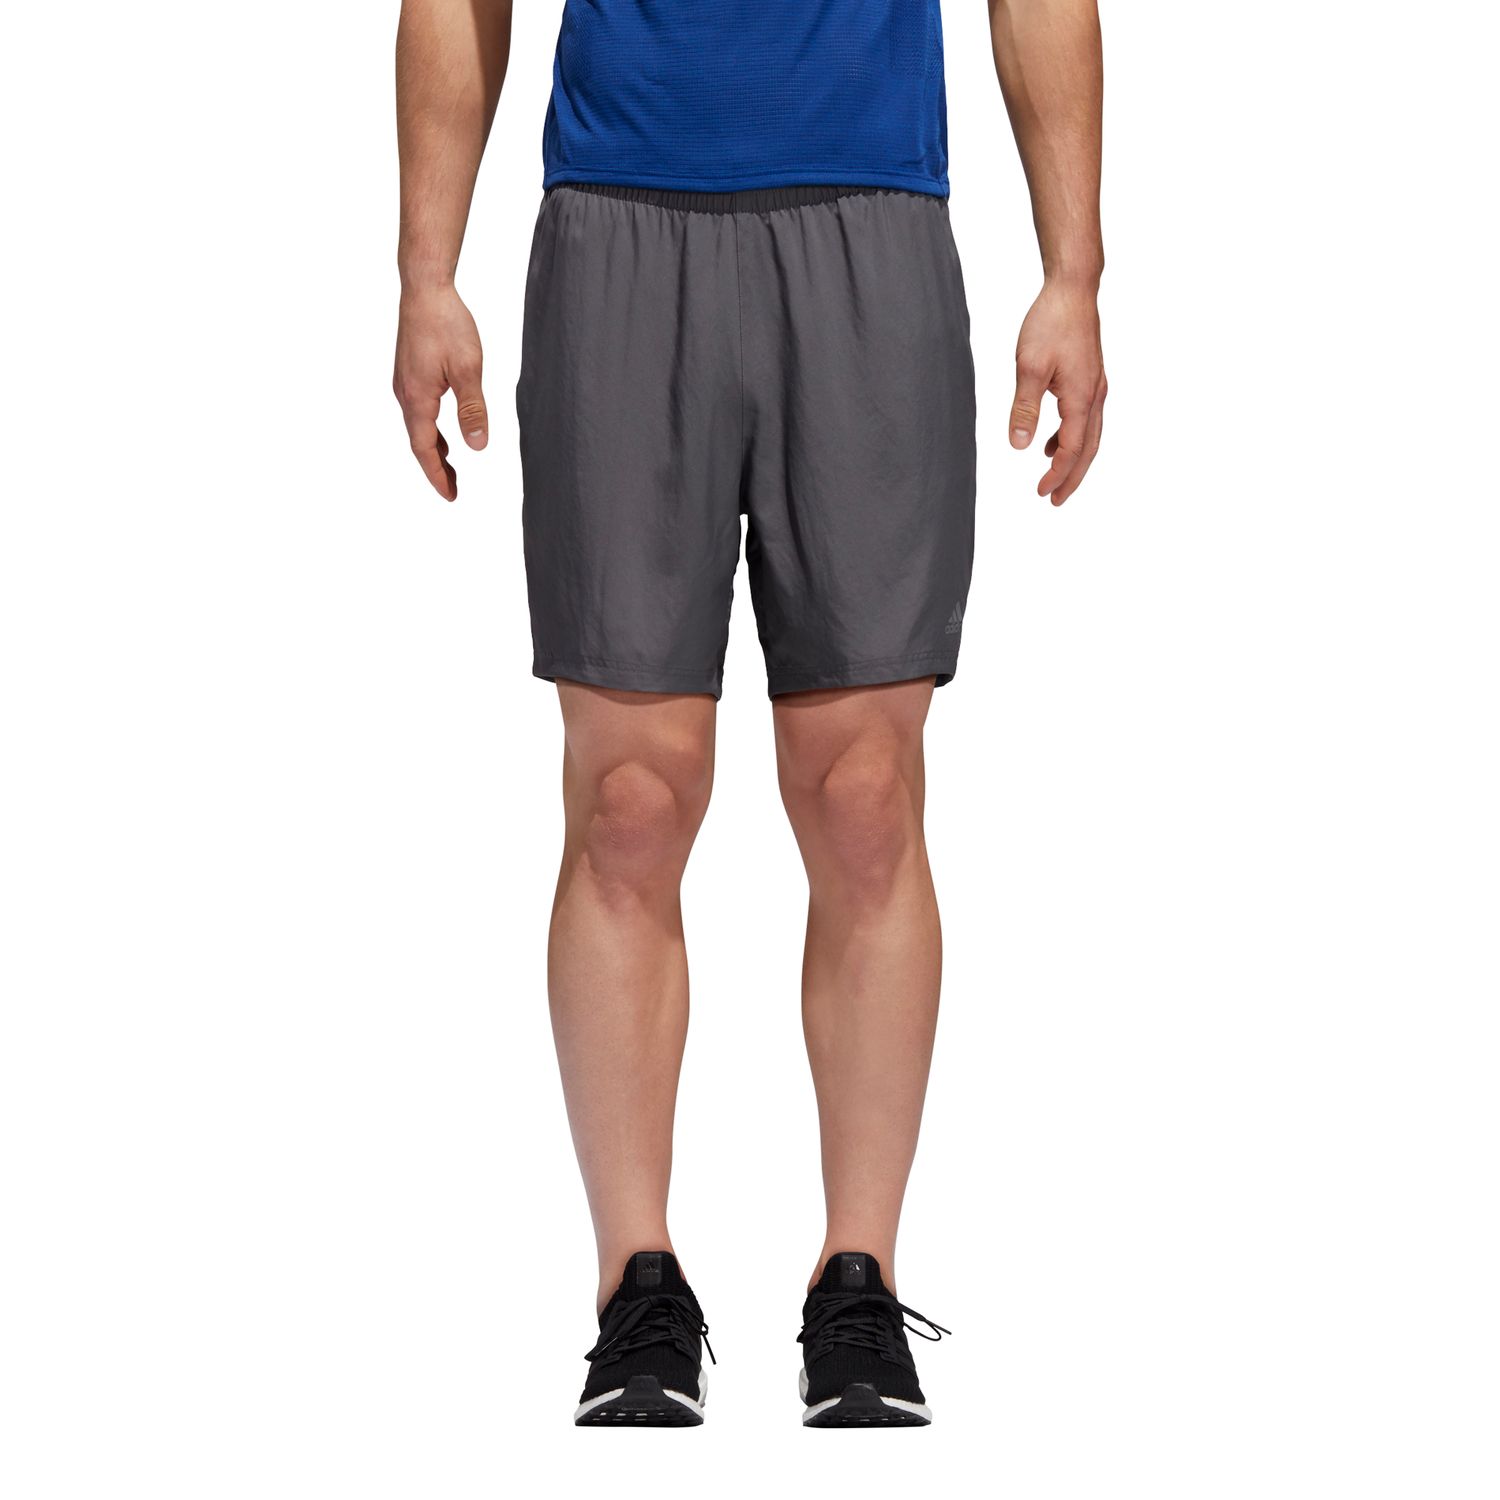 adidas shorts with compression liner